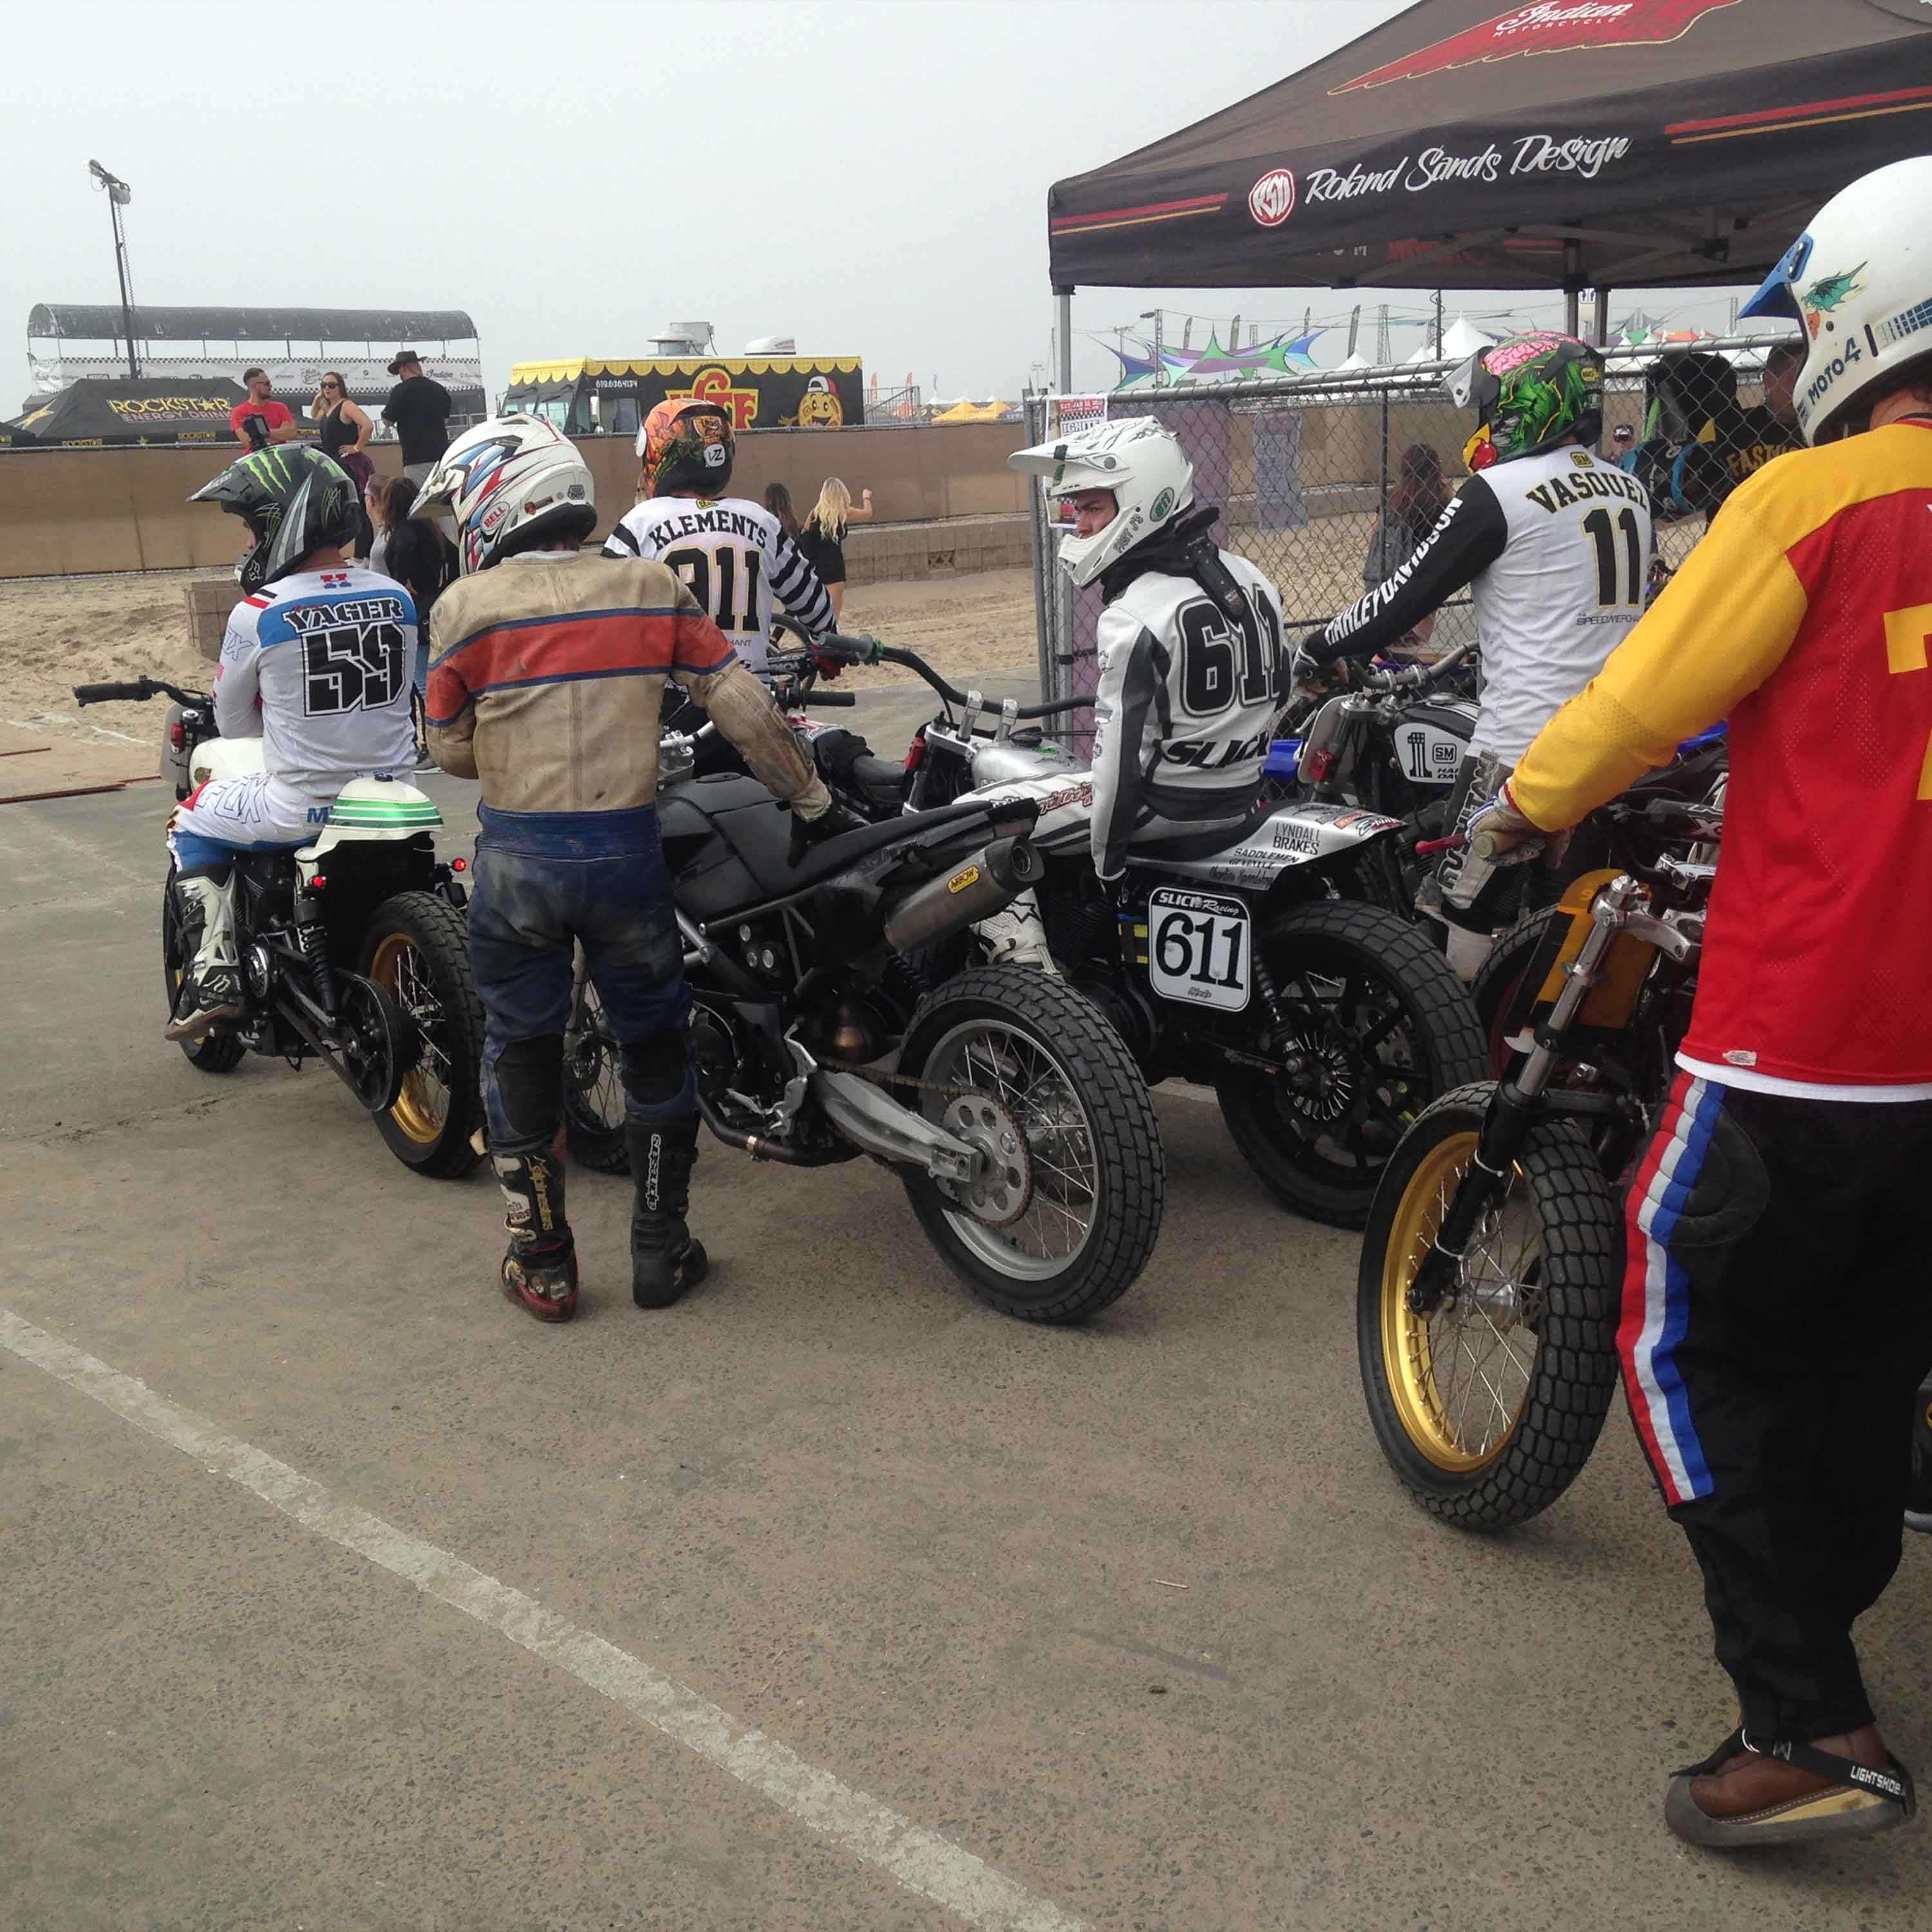 A motorcycle event at Huntington State Beach